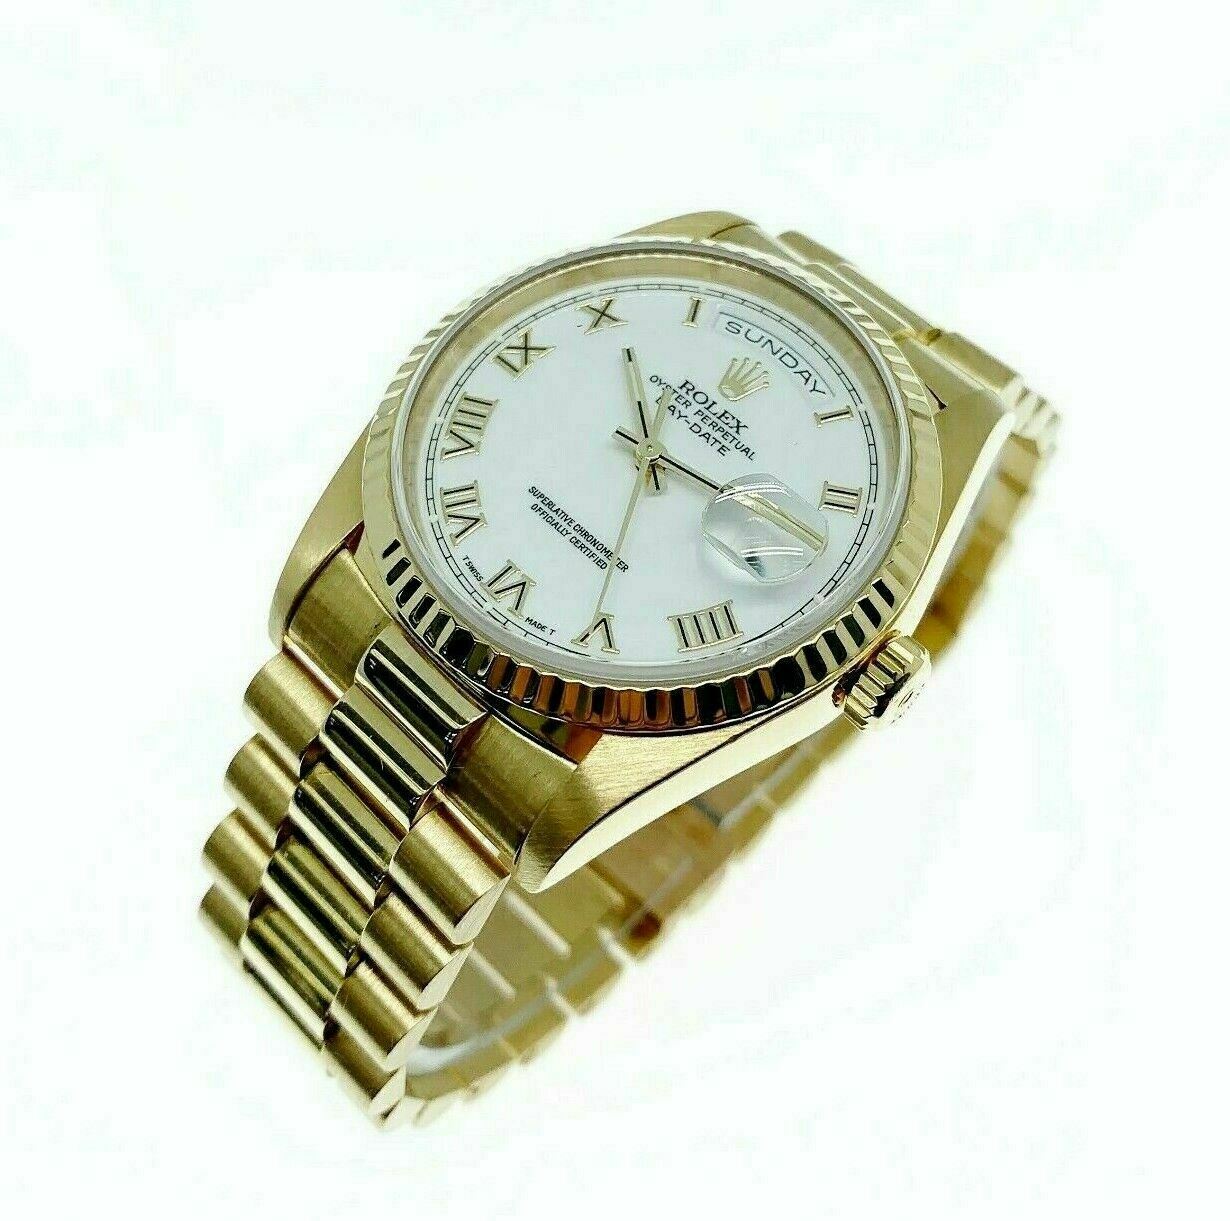 Rolex Day Date President 36mm Watch 18238 Box and Papers Double Quick Set